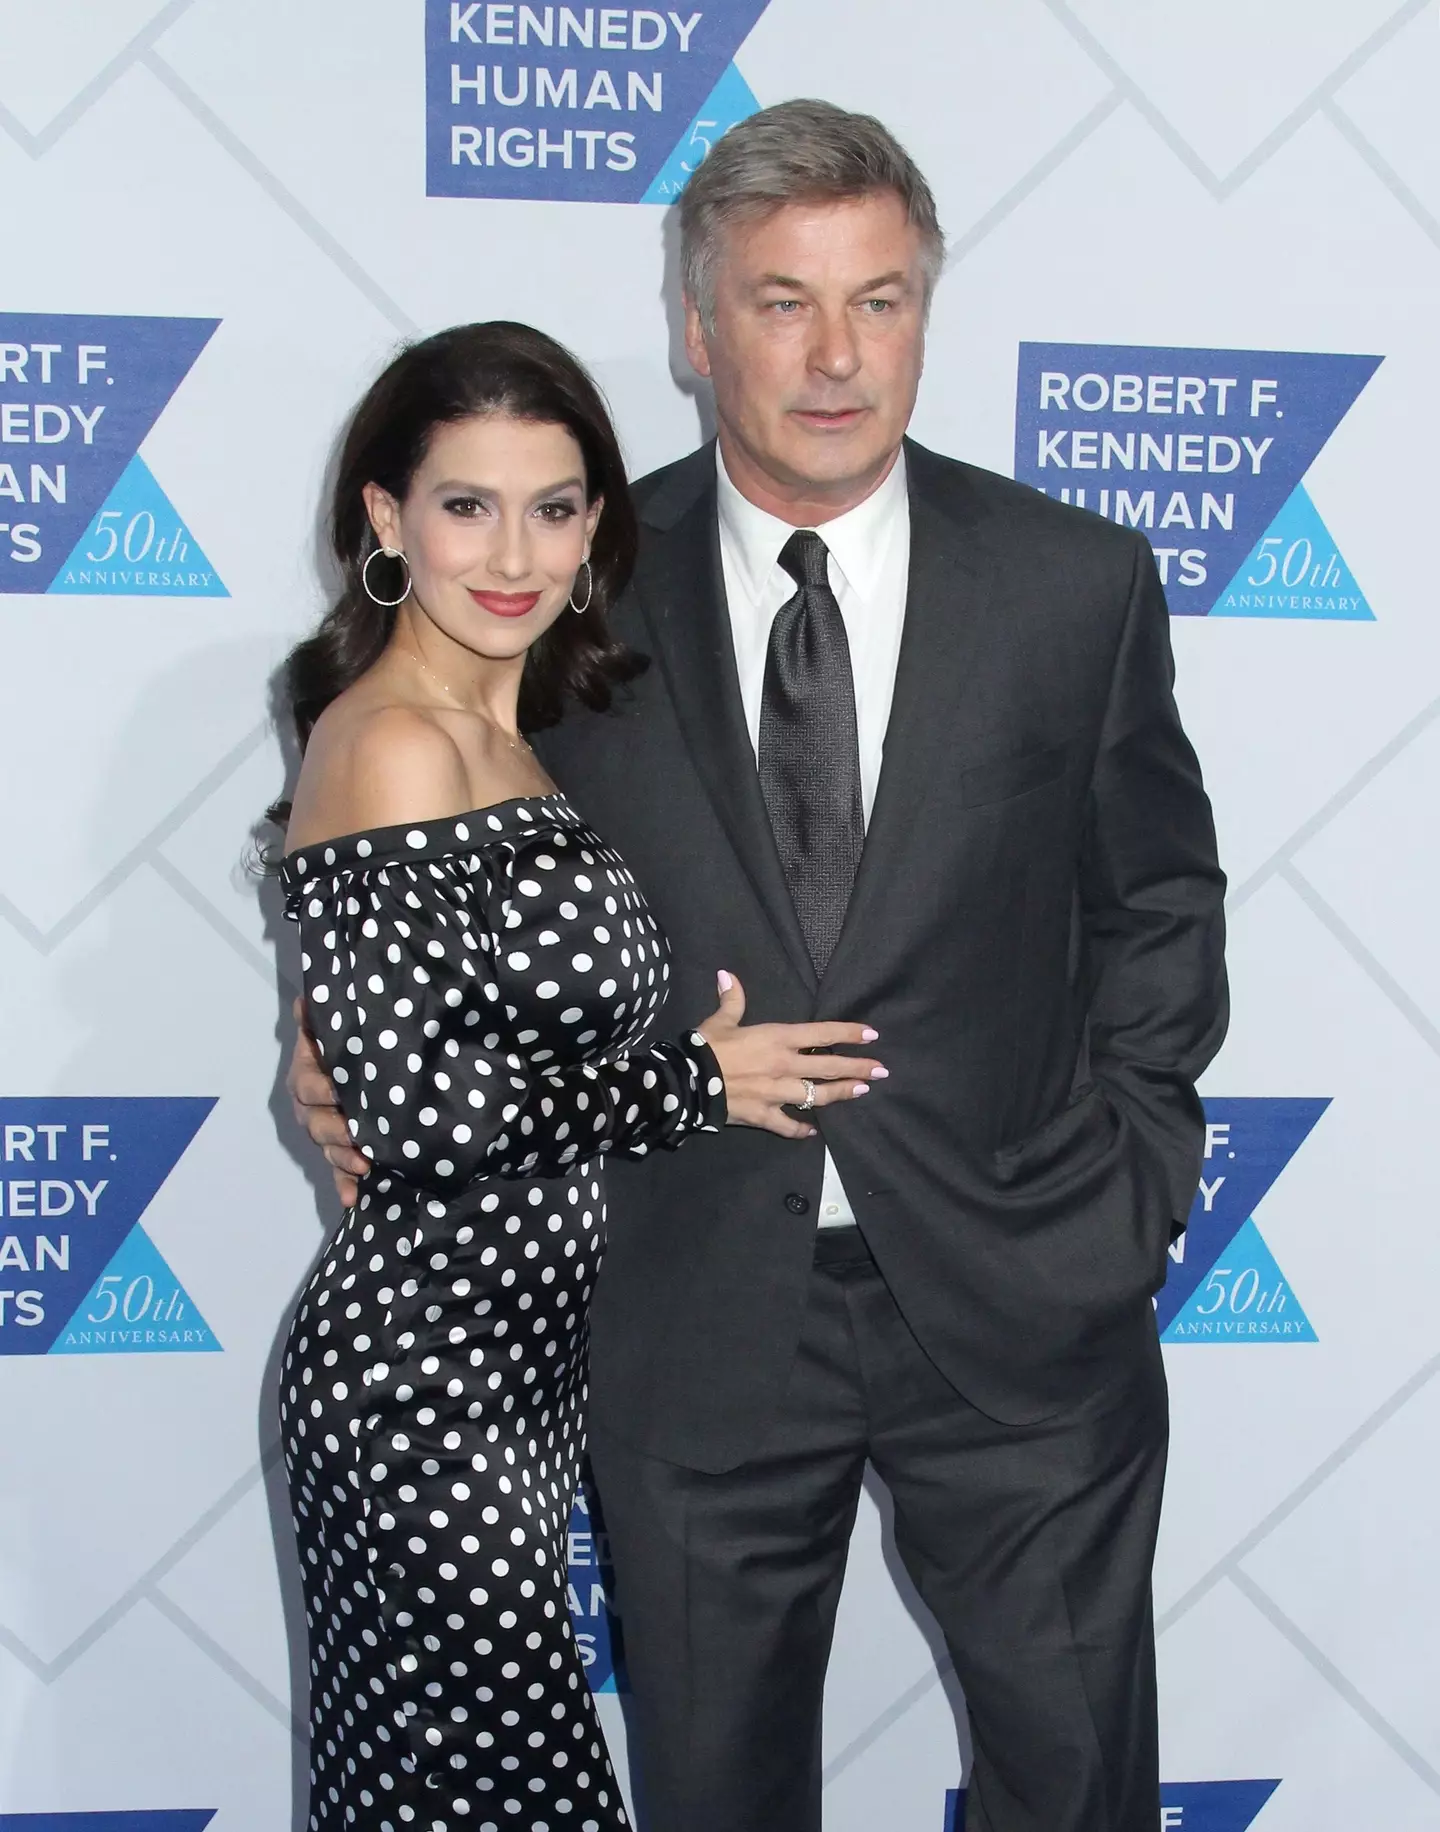 Hilaria and Alec Baldwin first met in 2011 and married a year later.